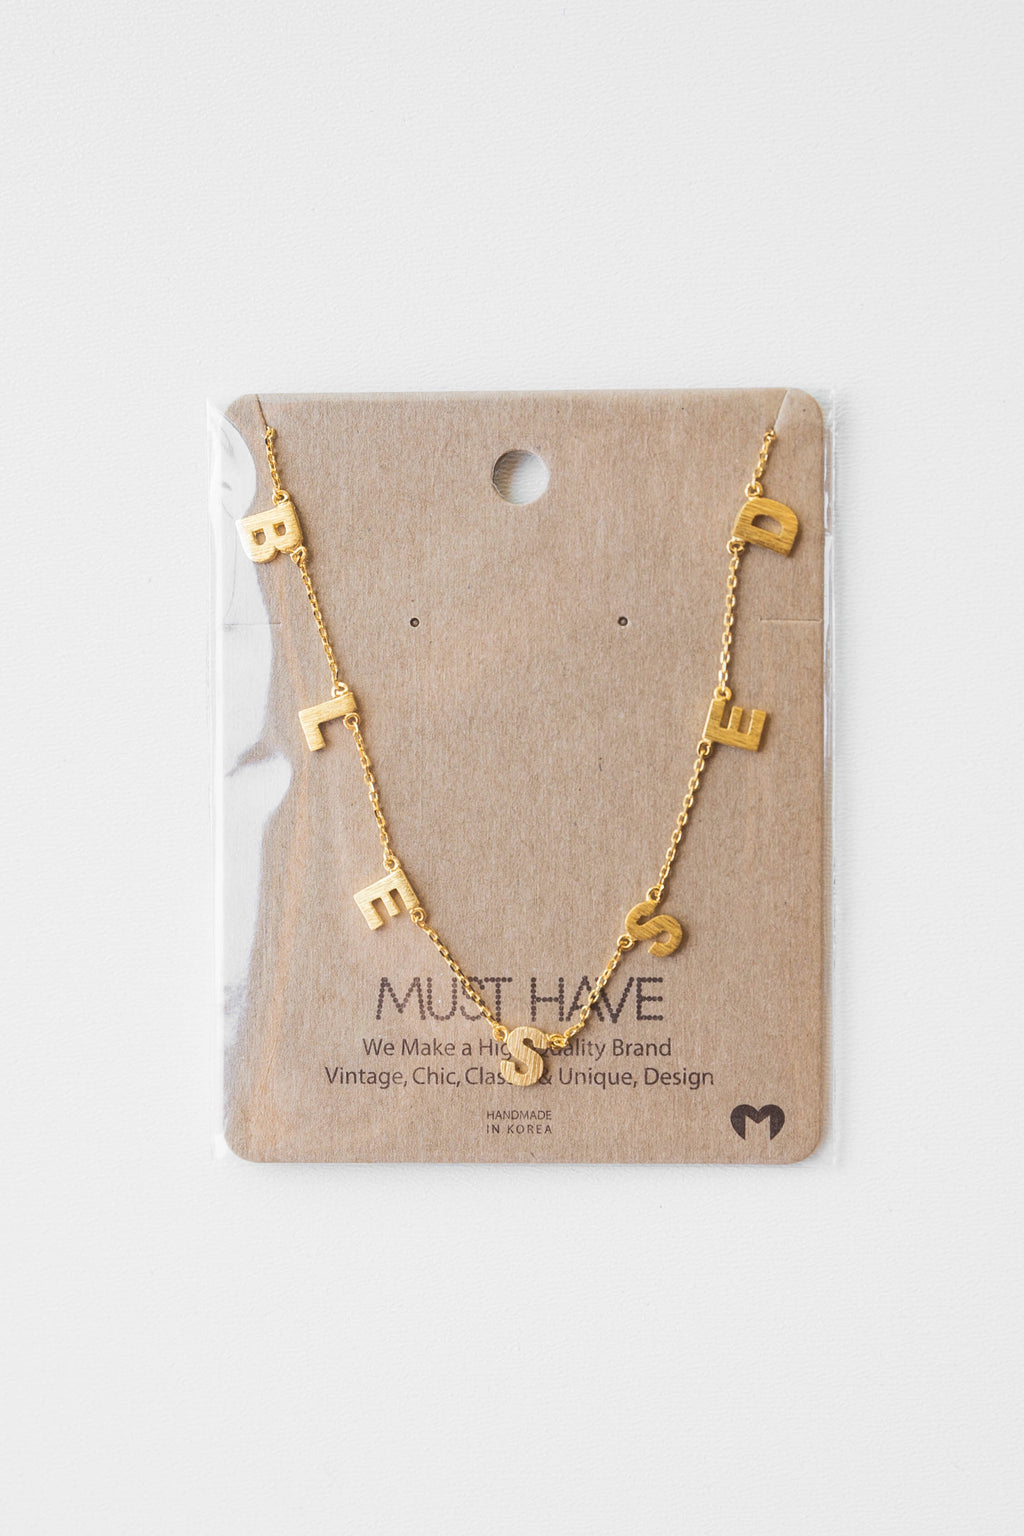 mode, read and believe necklace